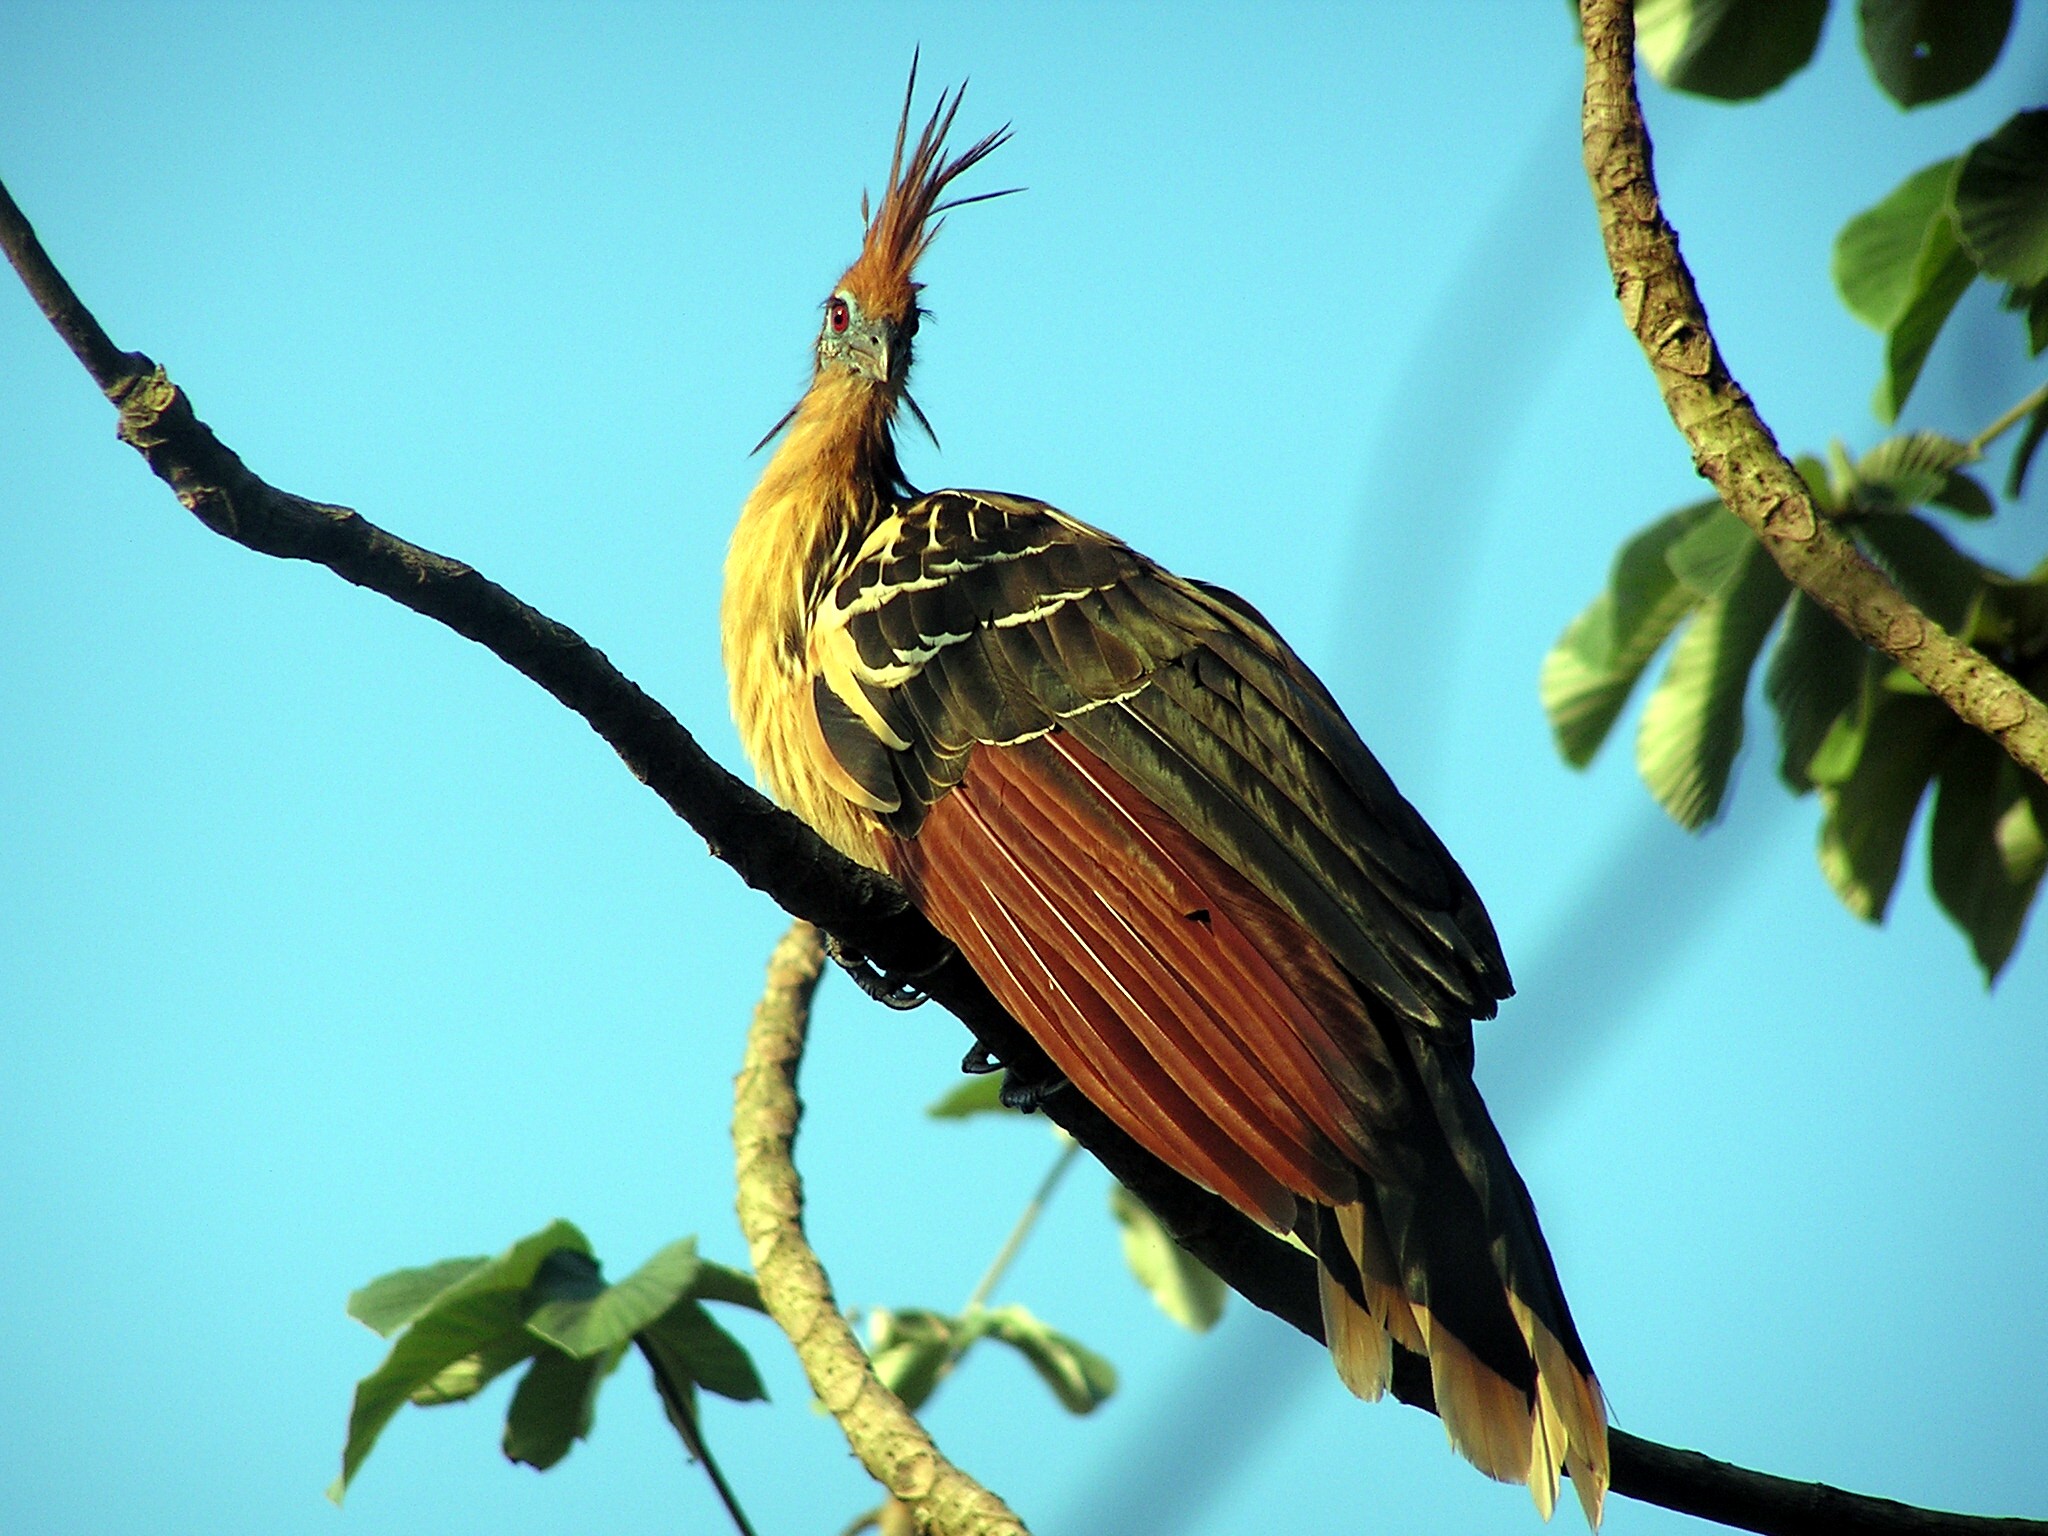 Are you allowed to own a hoatzin bird in the U.S if so how do you get one?